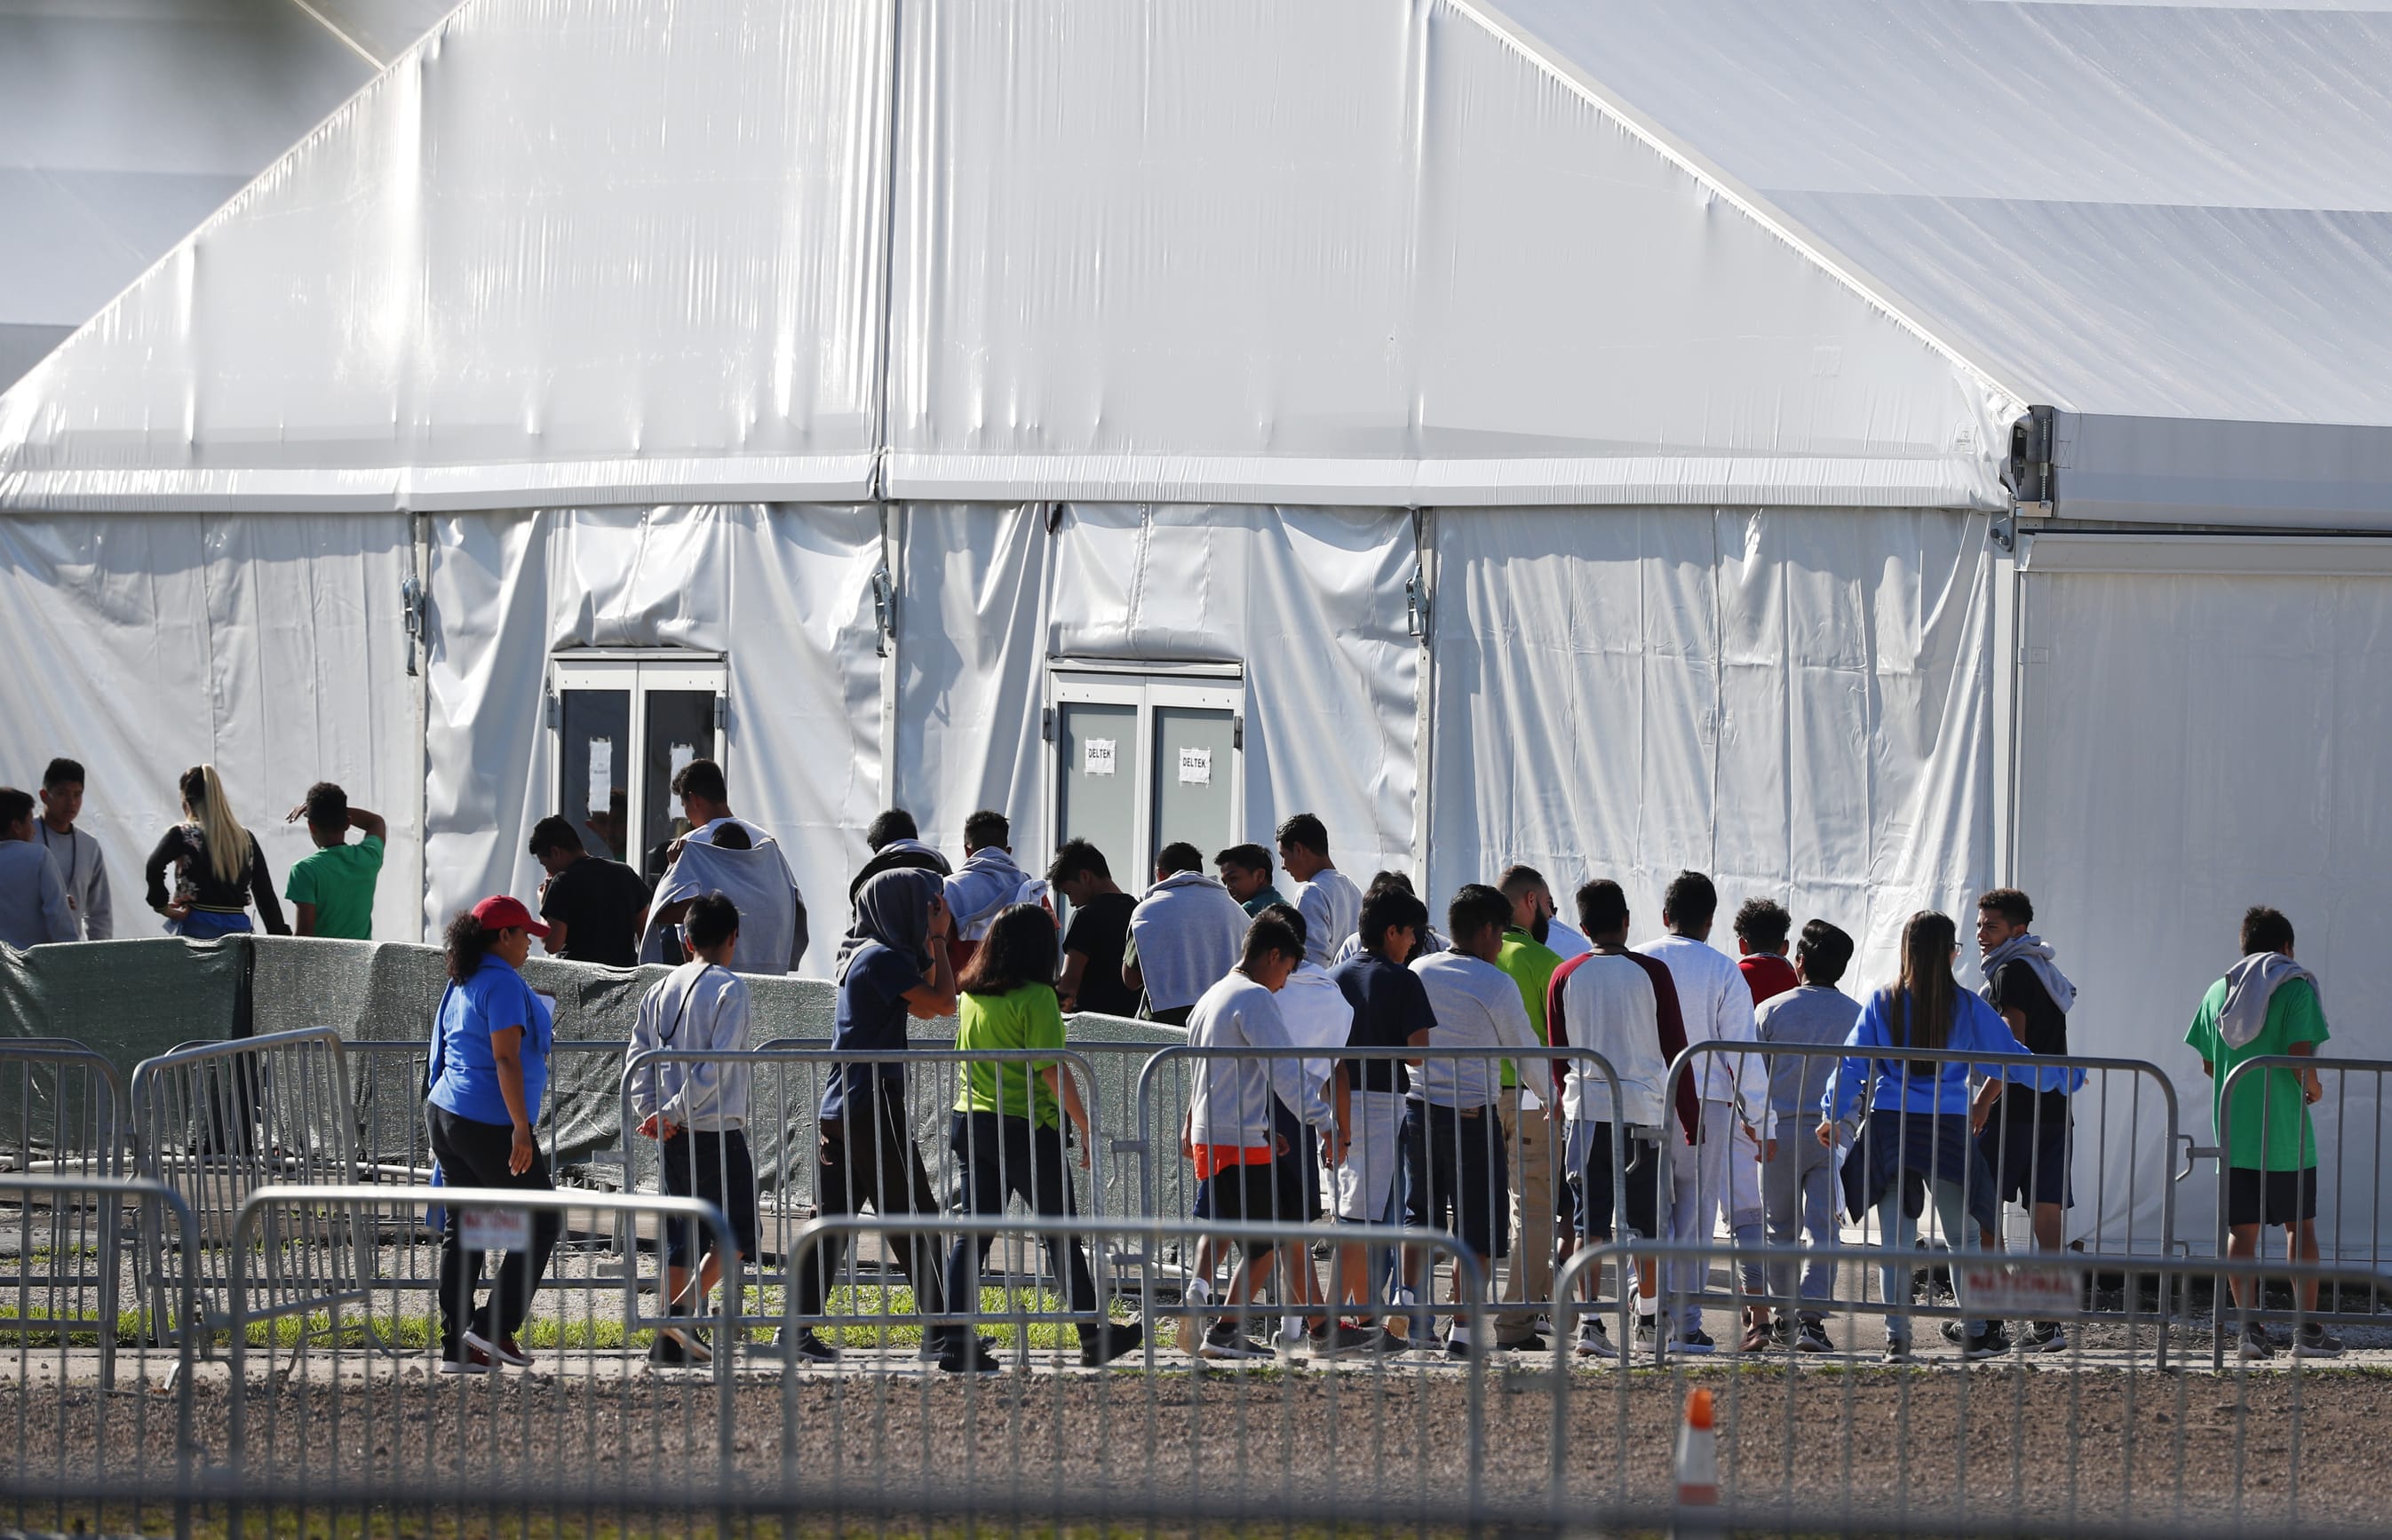 FILE- In this Feb. 19, 2019 file photo, children line up to enter a tent at the Homestead Temporary Shelter for Unaccompanied Children in Homestead, Fla.  Migrant children who were separated from their parents at the U.S.-Mexico border last year suffered post-traumatic stress and other serious mental health problems, according to an internal watchdog report obtained by The Associated Press Wednesday. The chaotic reunification process only added to their trauma.